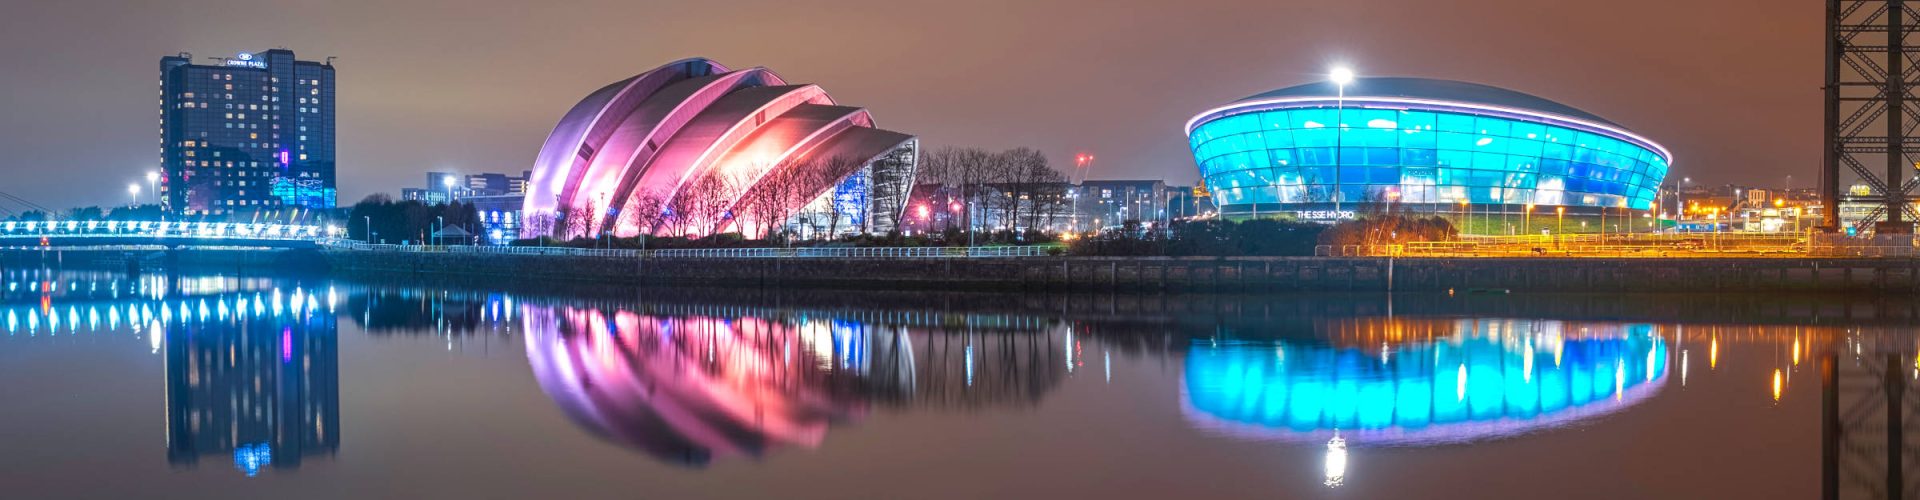 Glasgow Hydro and Armadillo, lit up at night